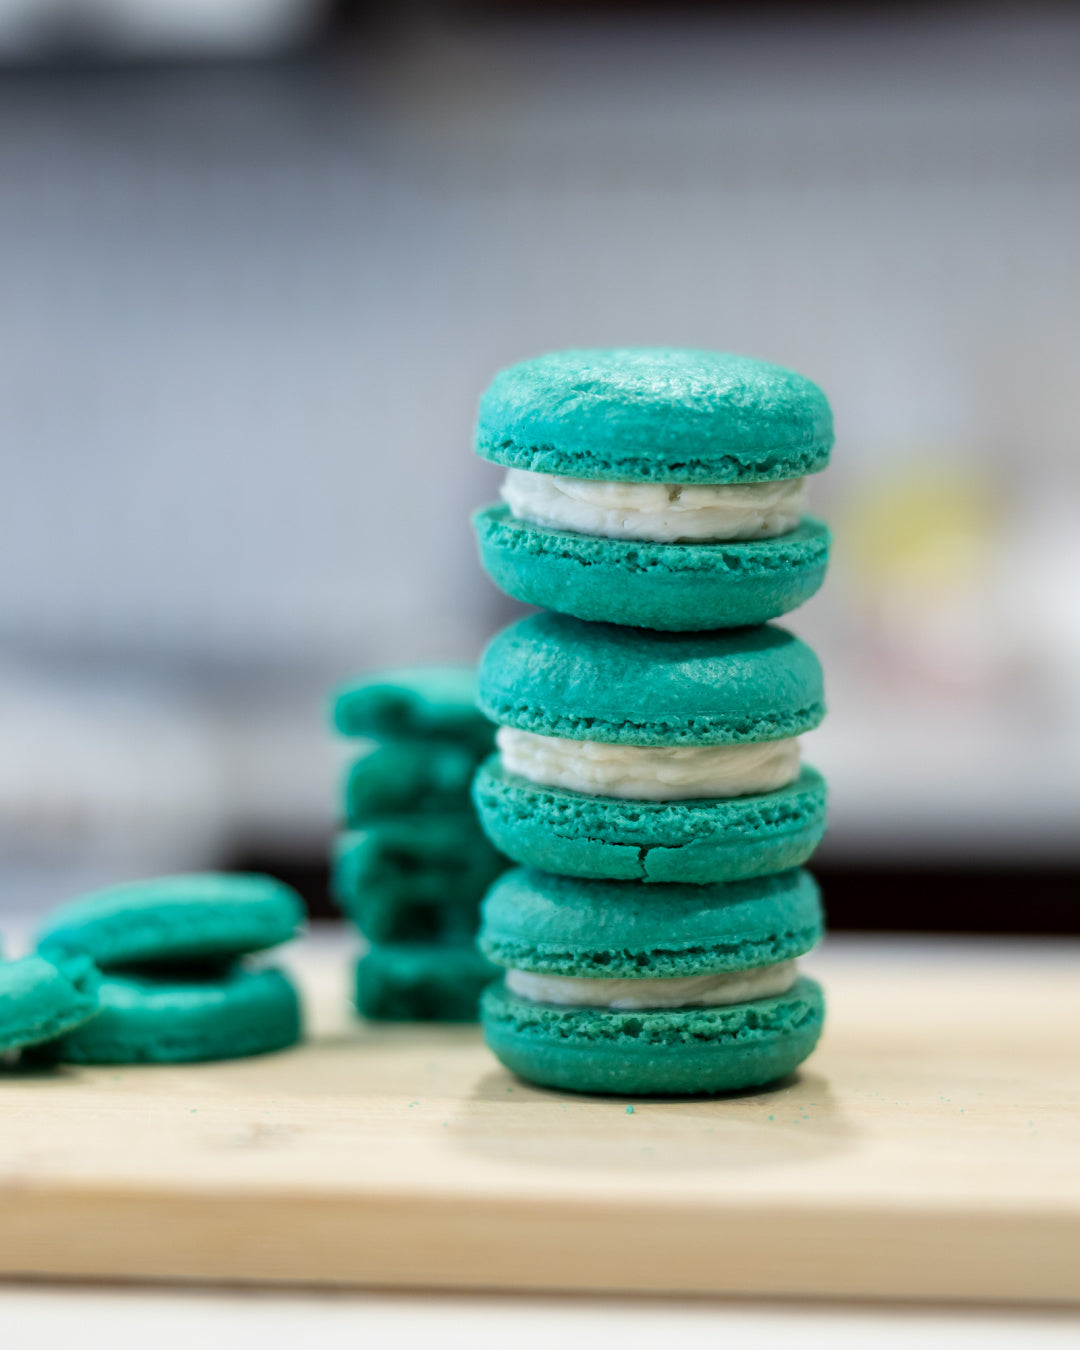 French Macarons (Like a PRO) *BAKERS BUNDLE*